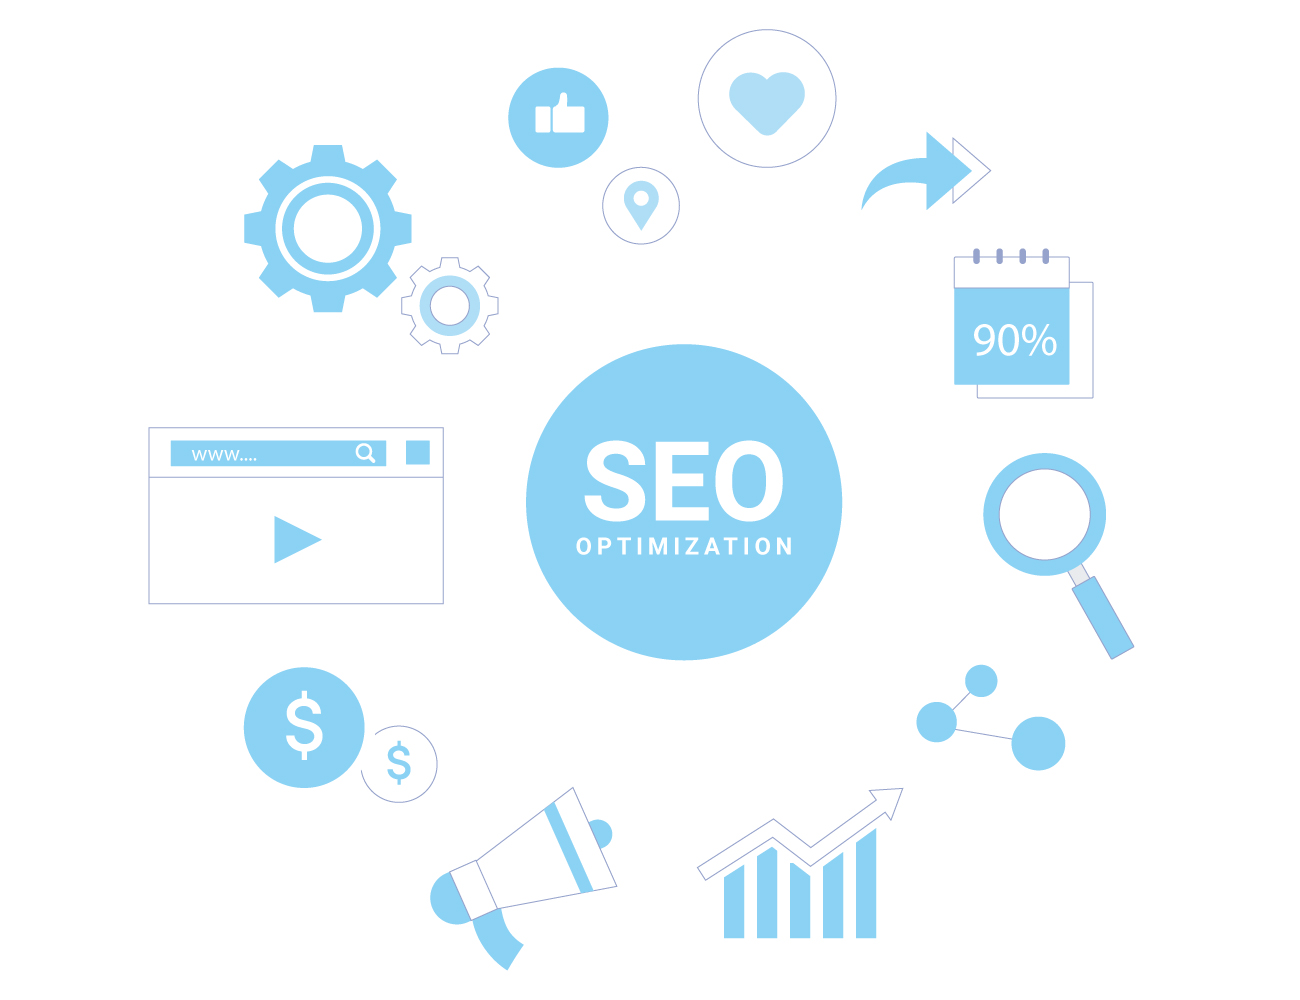 Website Promotion in Google Search Engines - IntlTech